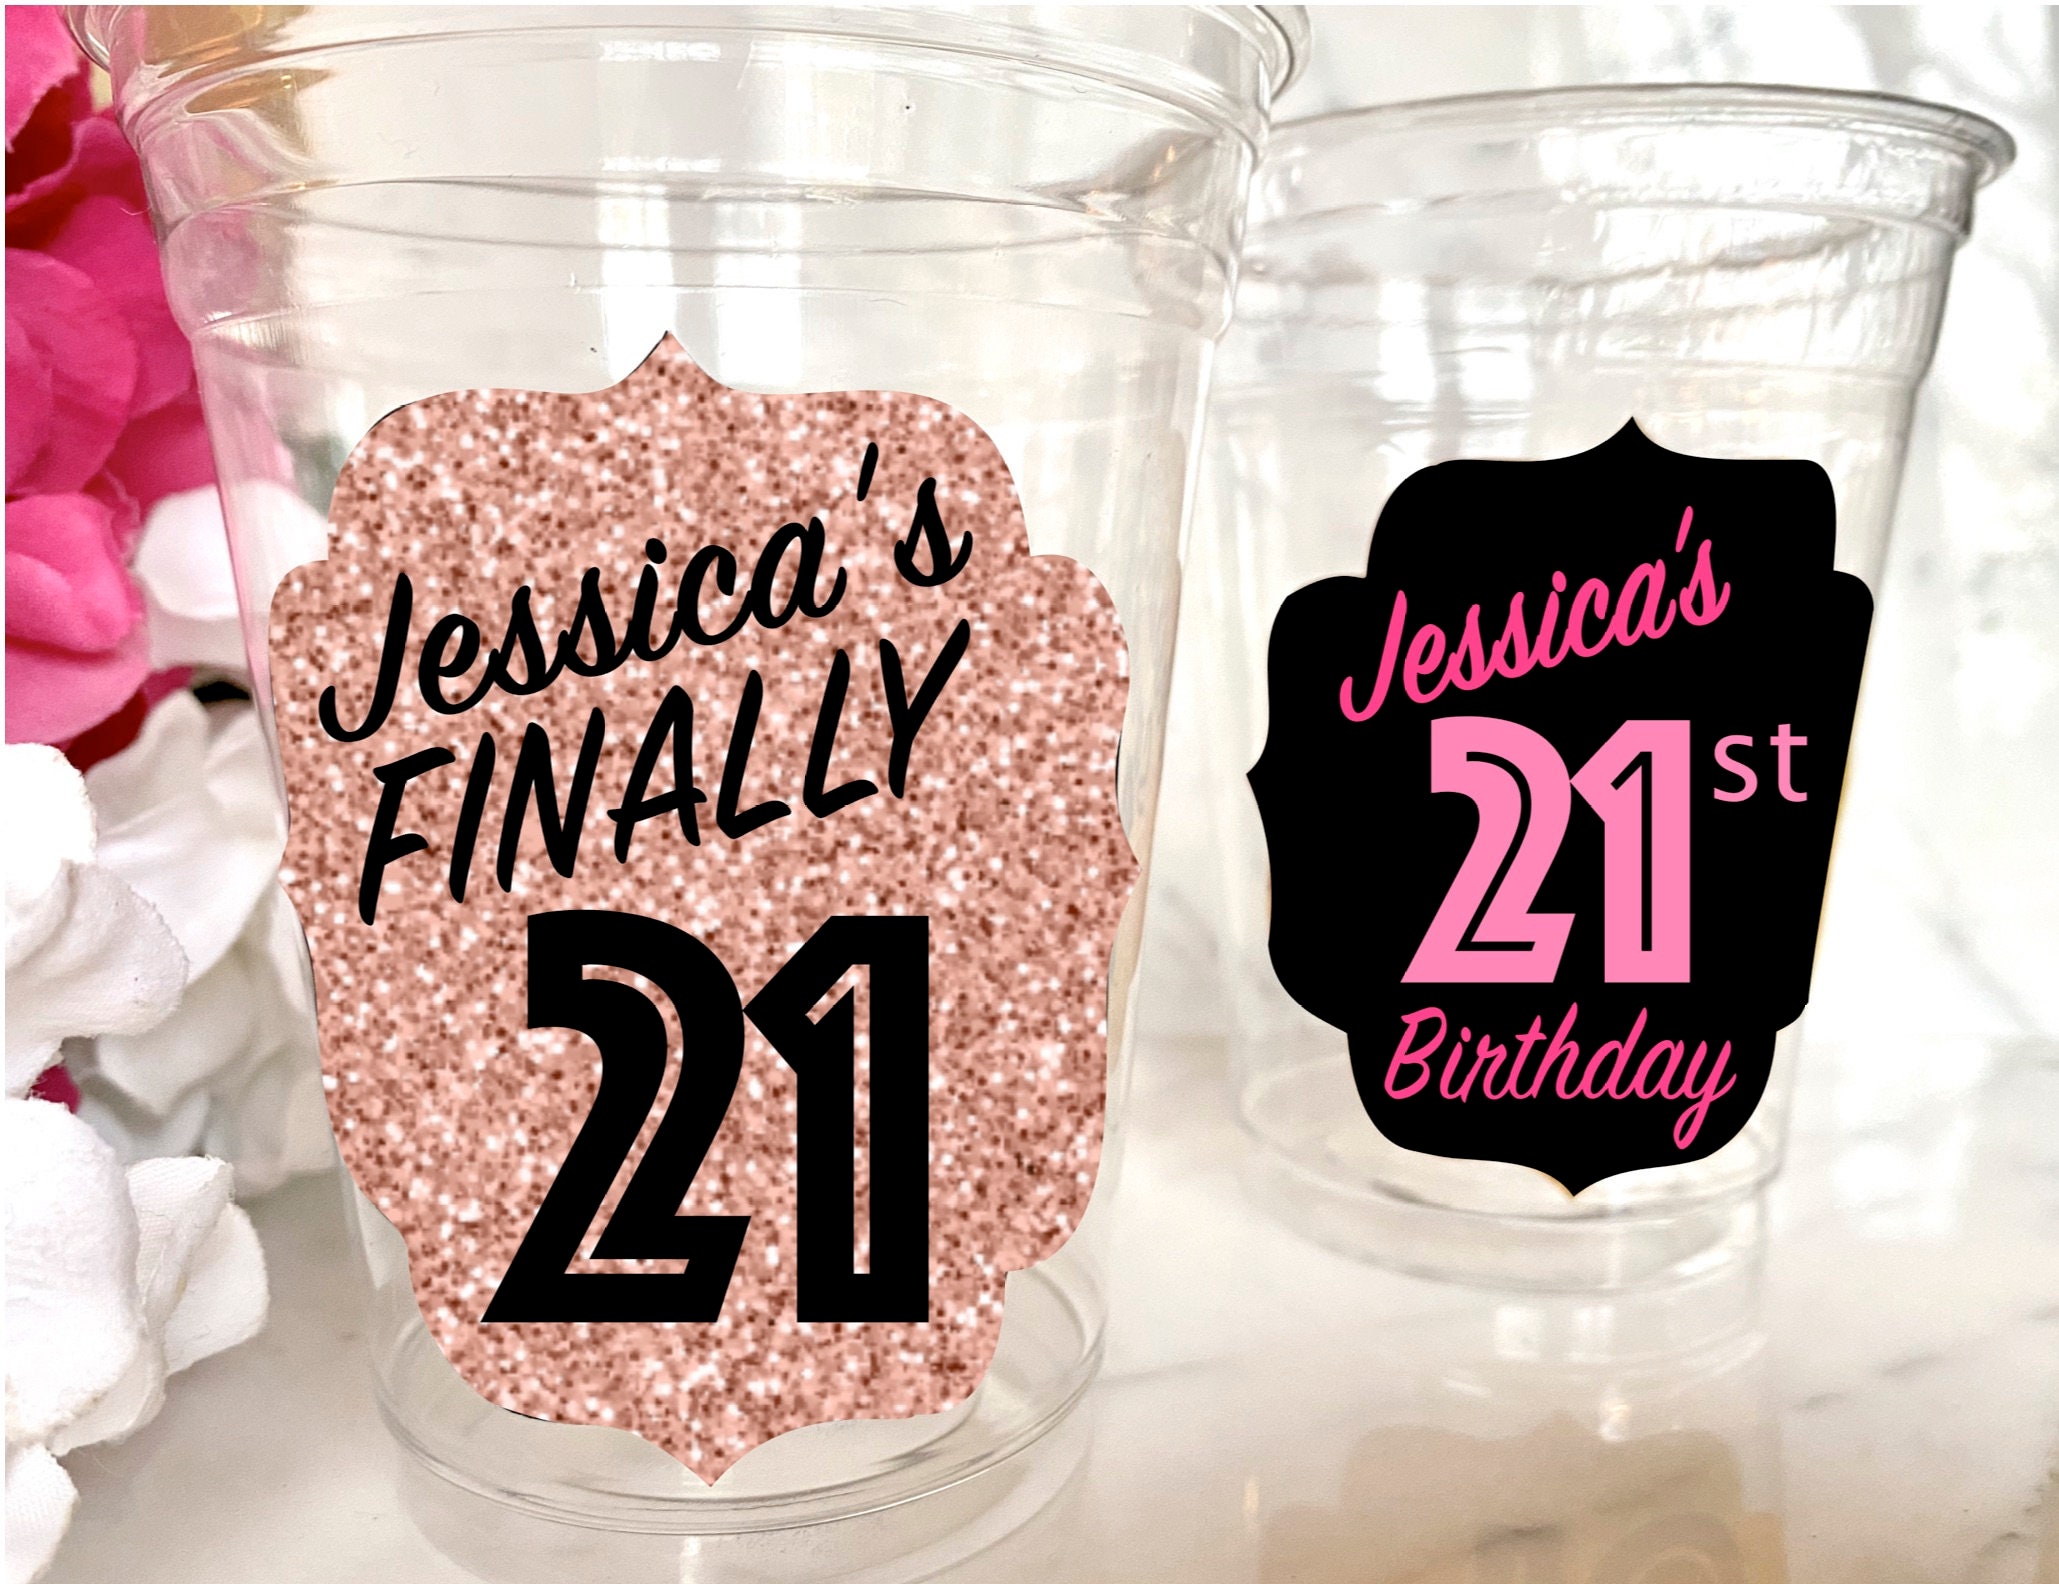 Easy 21st Birthday Party favors! 🥃 #Newyear #fyp #partyfavors #21stbi, 21st birthday ideas